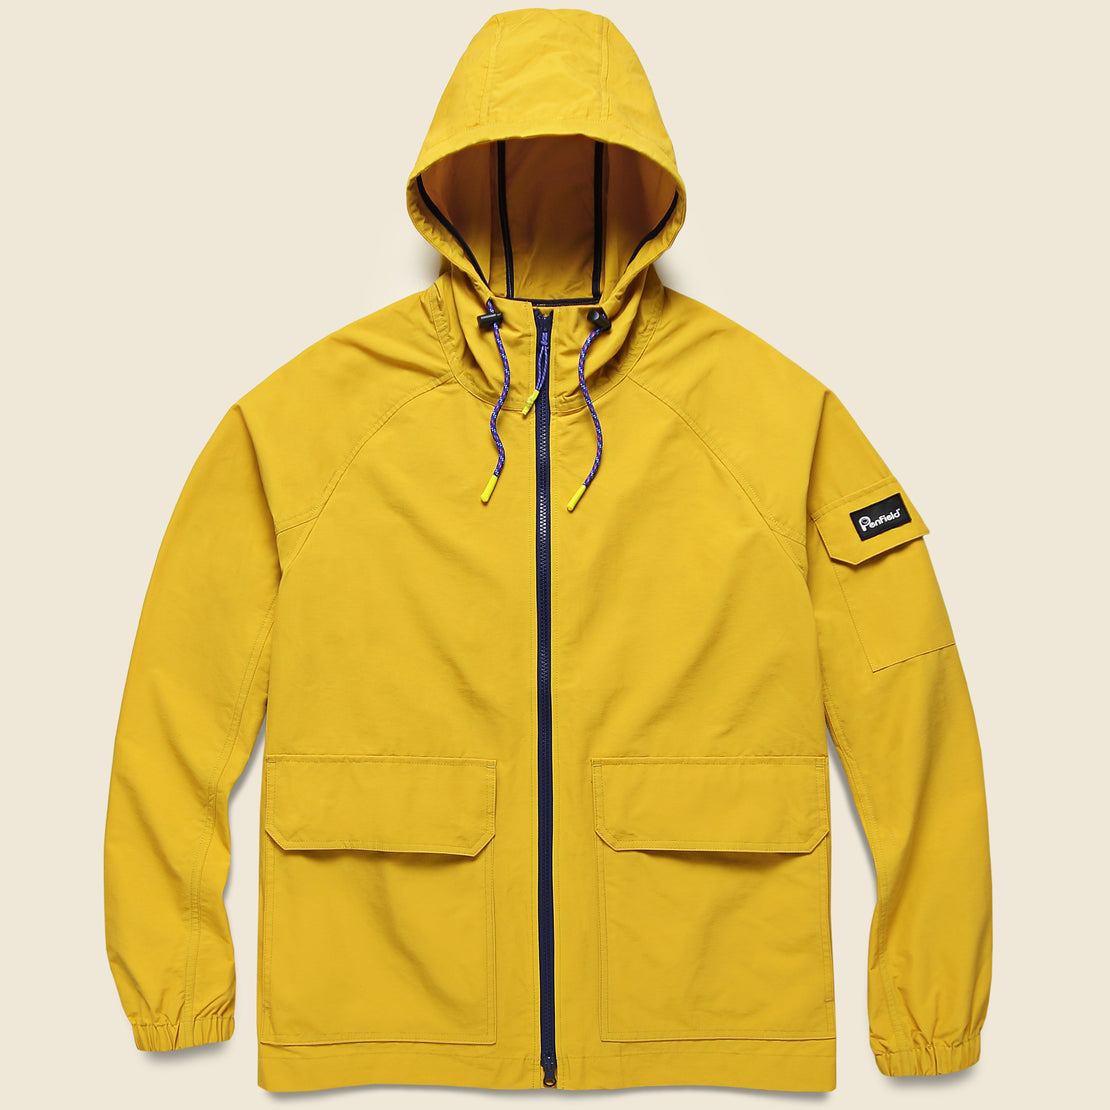 Halcott Jacket - Mineral Yellow - Penfield - STAG Provisions - Outerwear - Coat / Jacket